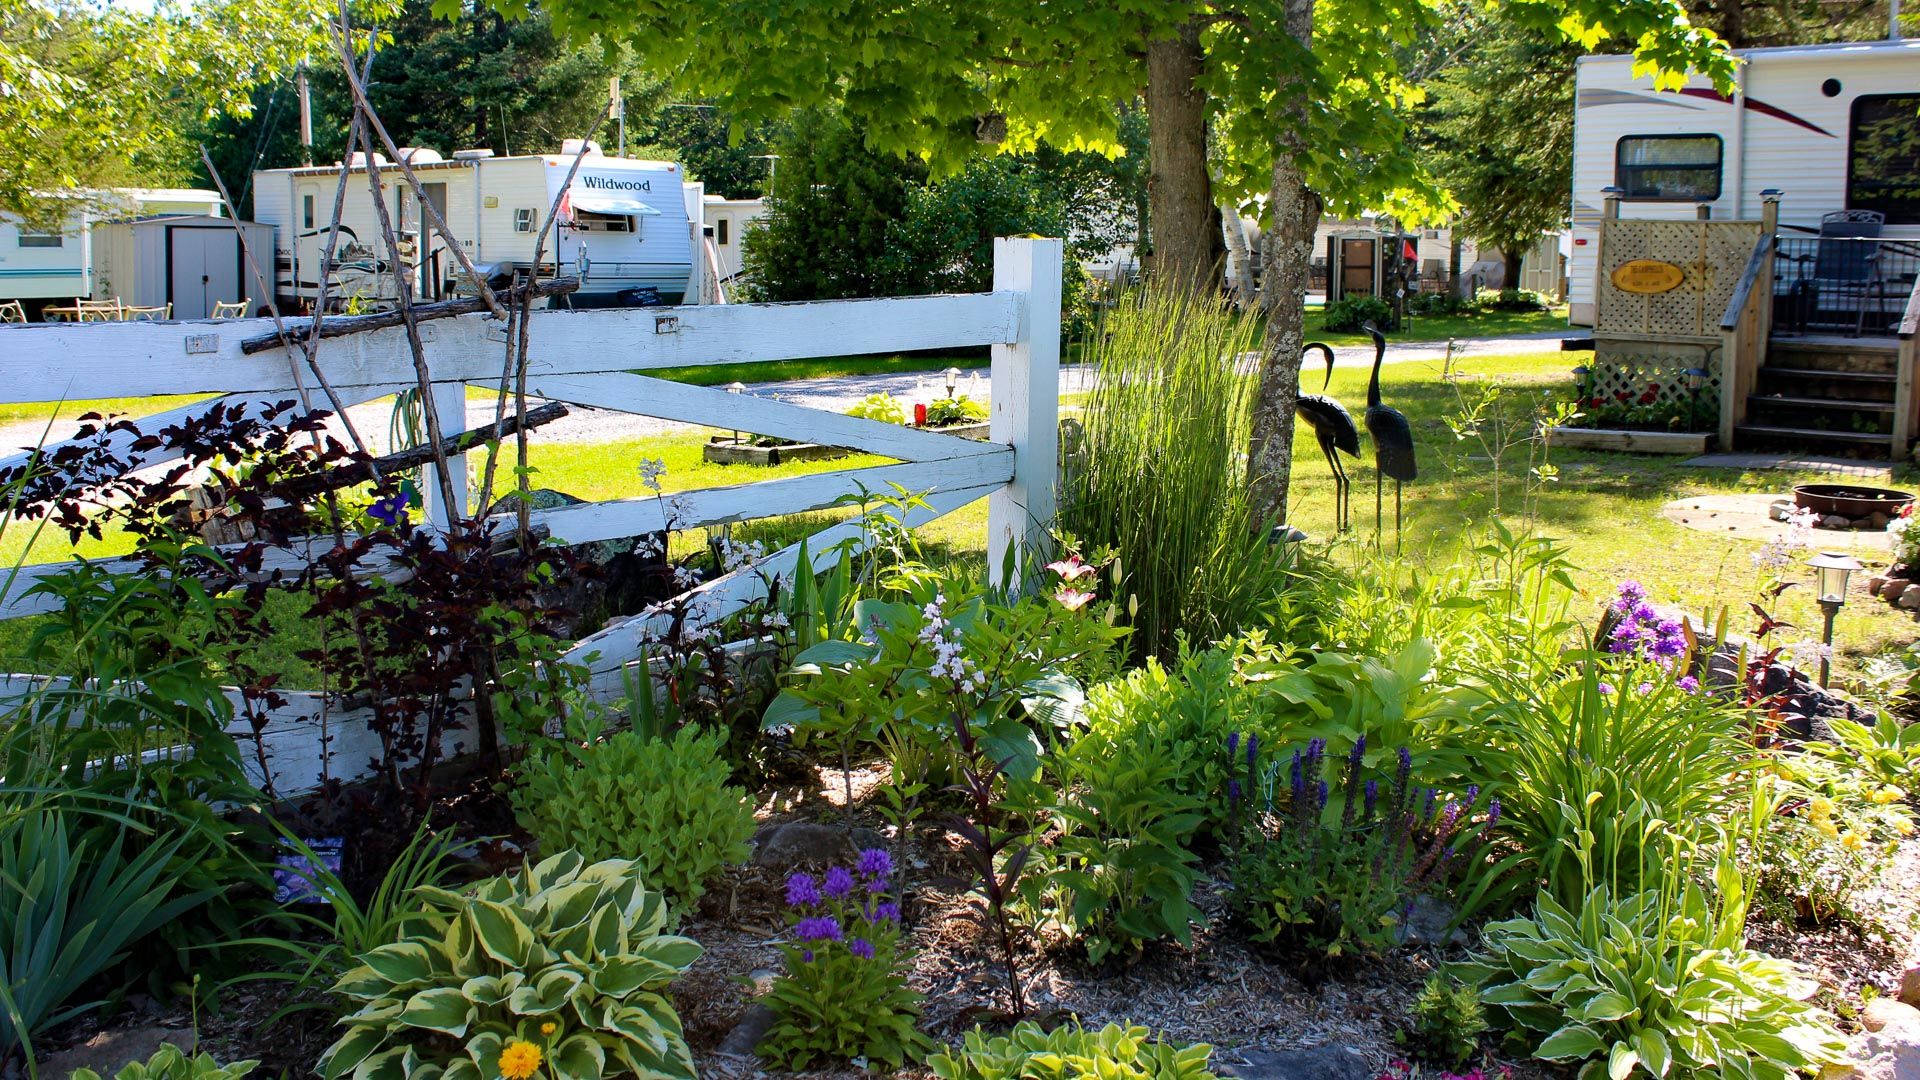 A white fence surrounds a garden with a rv parked in the background.